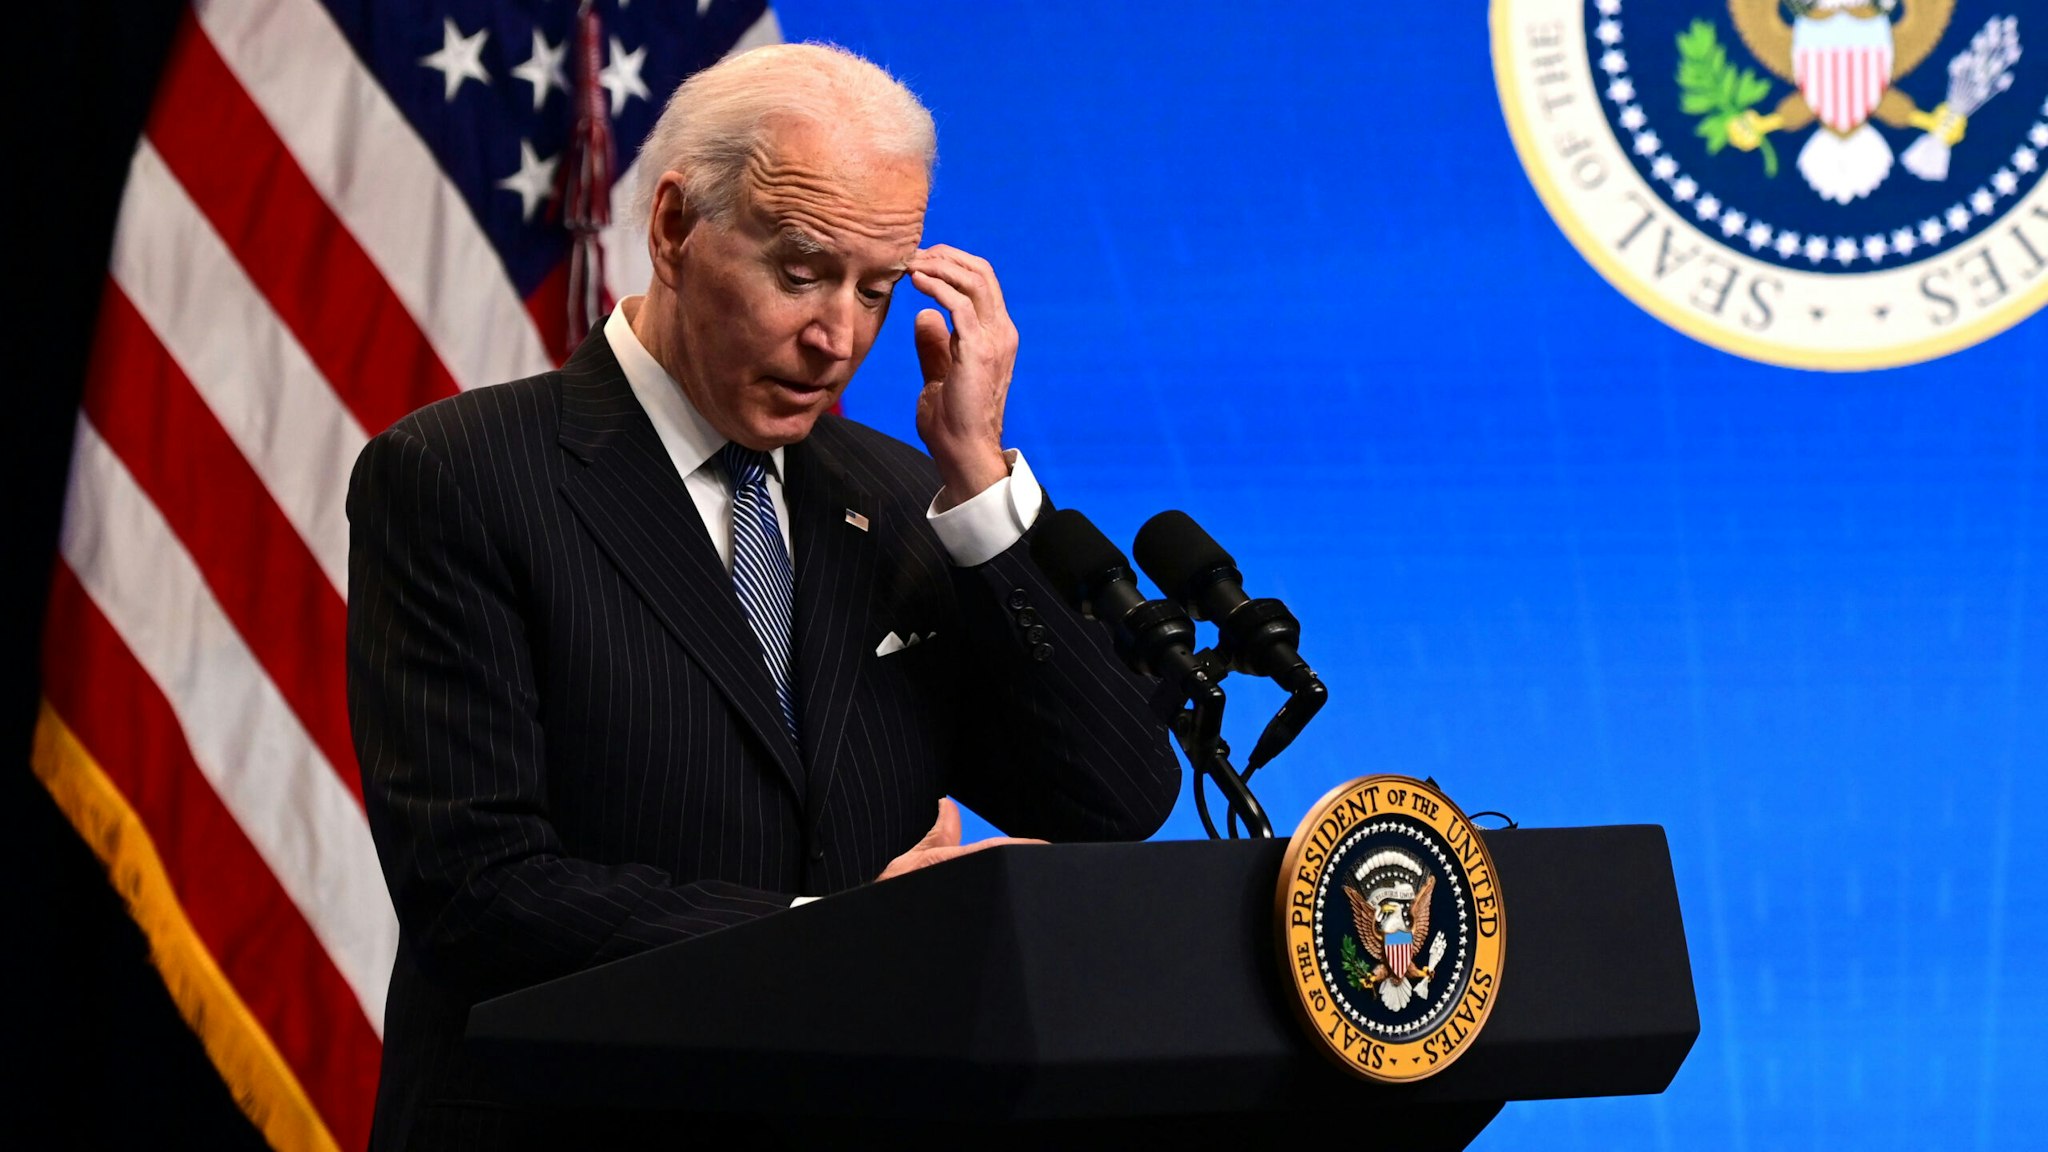 US President Joe Biden answers questions from the media after signing a "Made in America" Executive Order in the South Court Auditorium at the White House on January 25, 2021 in Washington, DC.